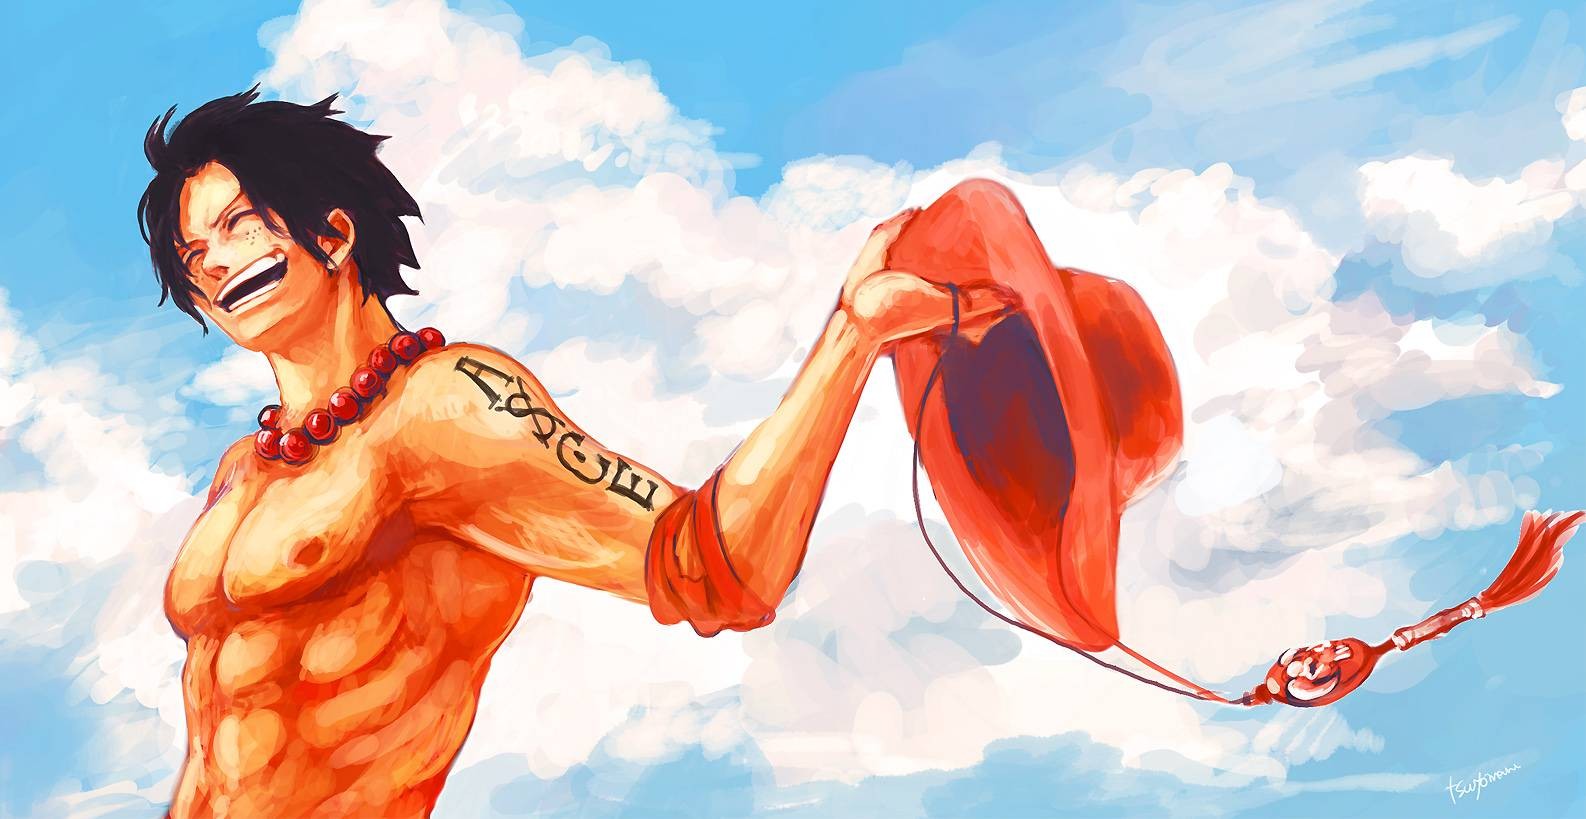 171kib, 1586x819, The Images Of One Piece Anime Ace - One Piece Ace Wallpaper Hd , HD Wallpaper & Backgrounds